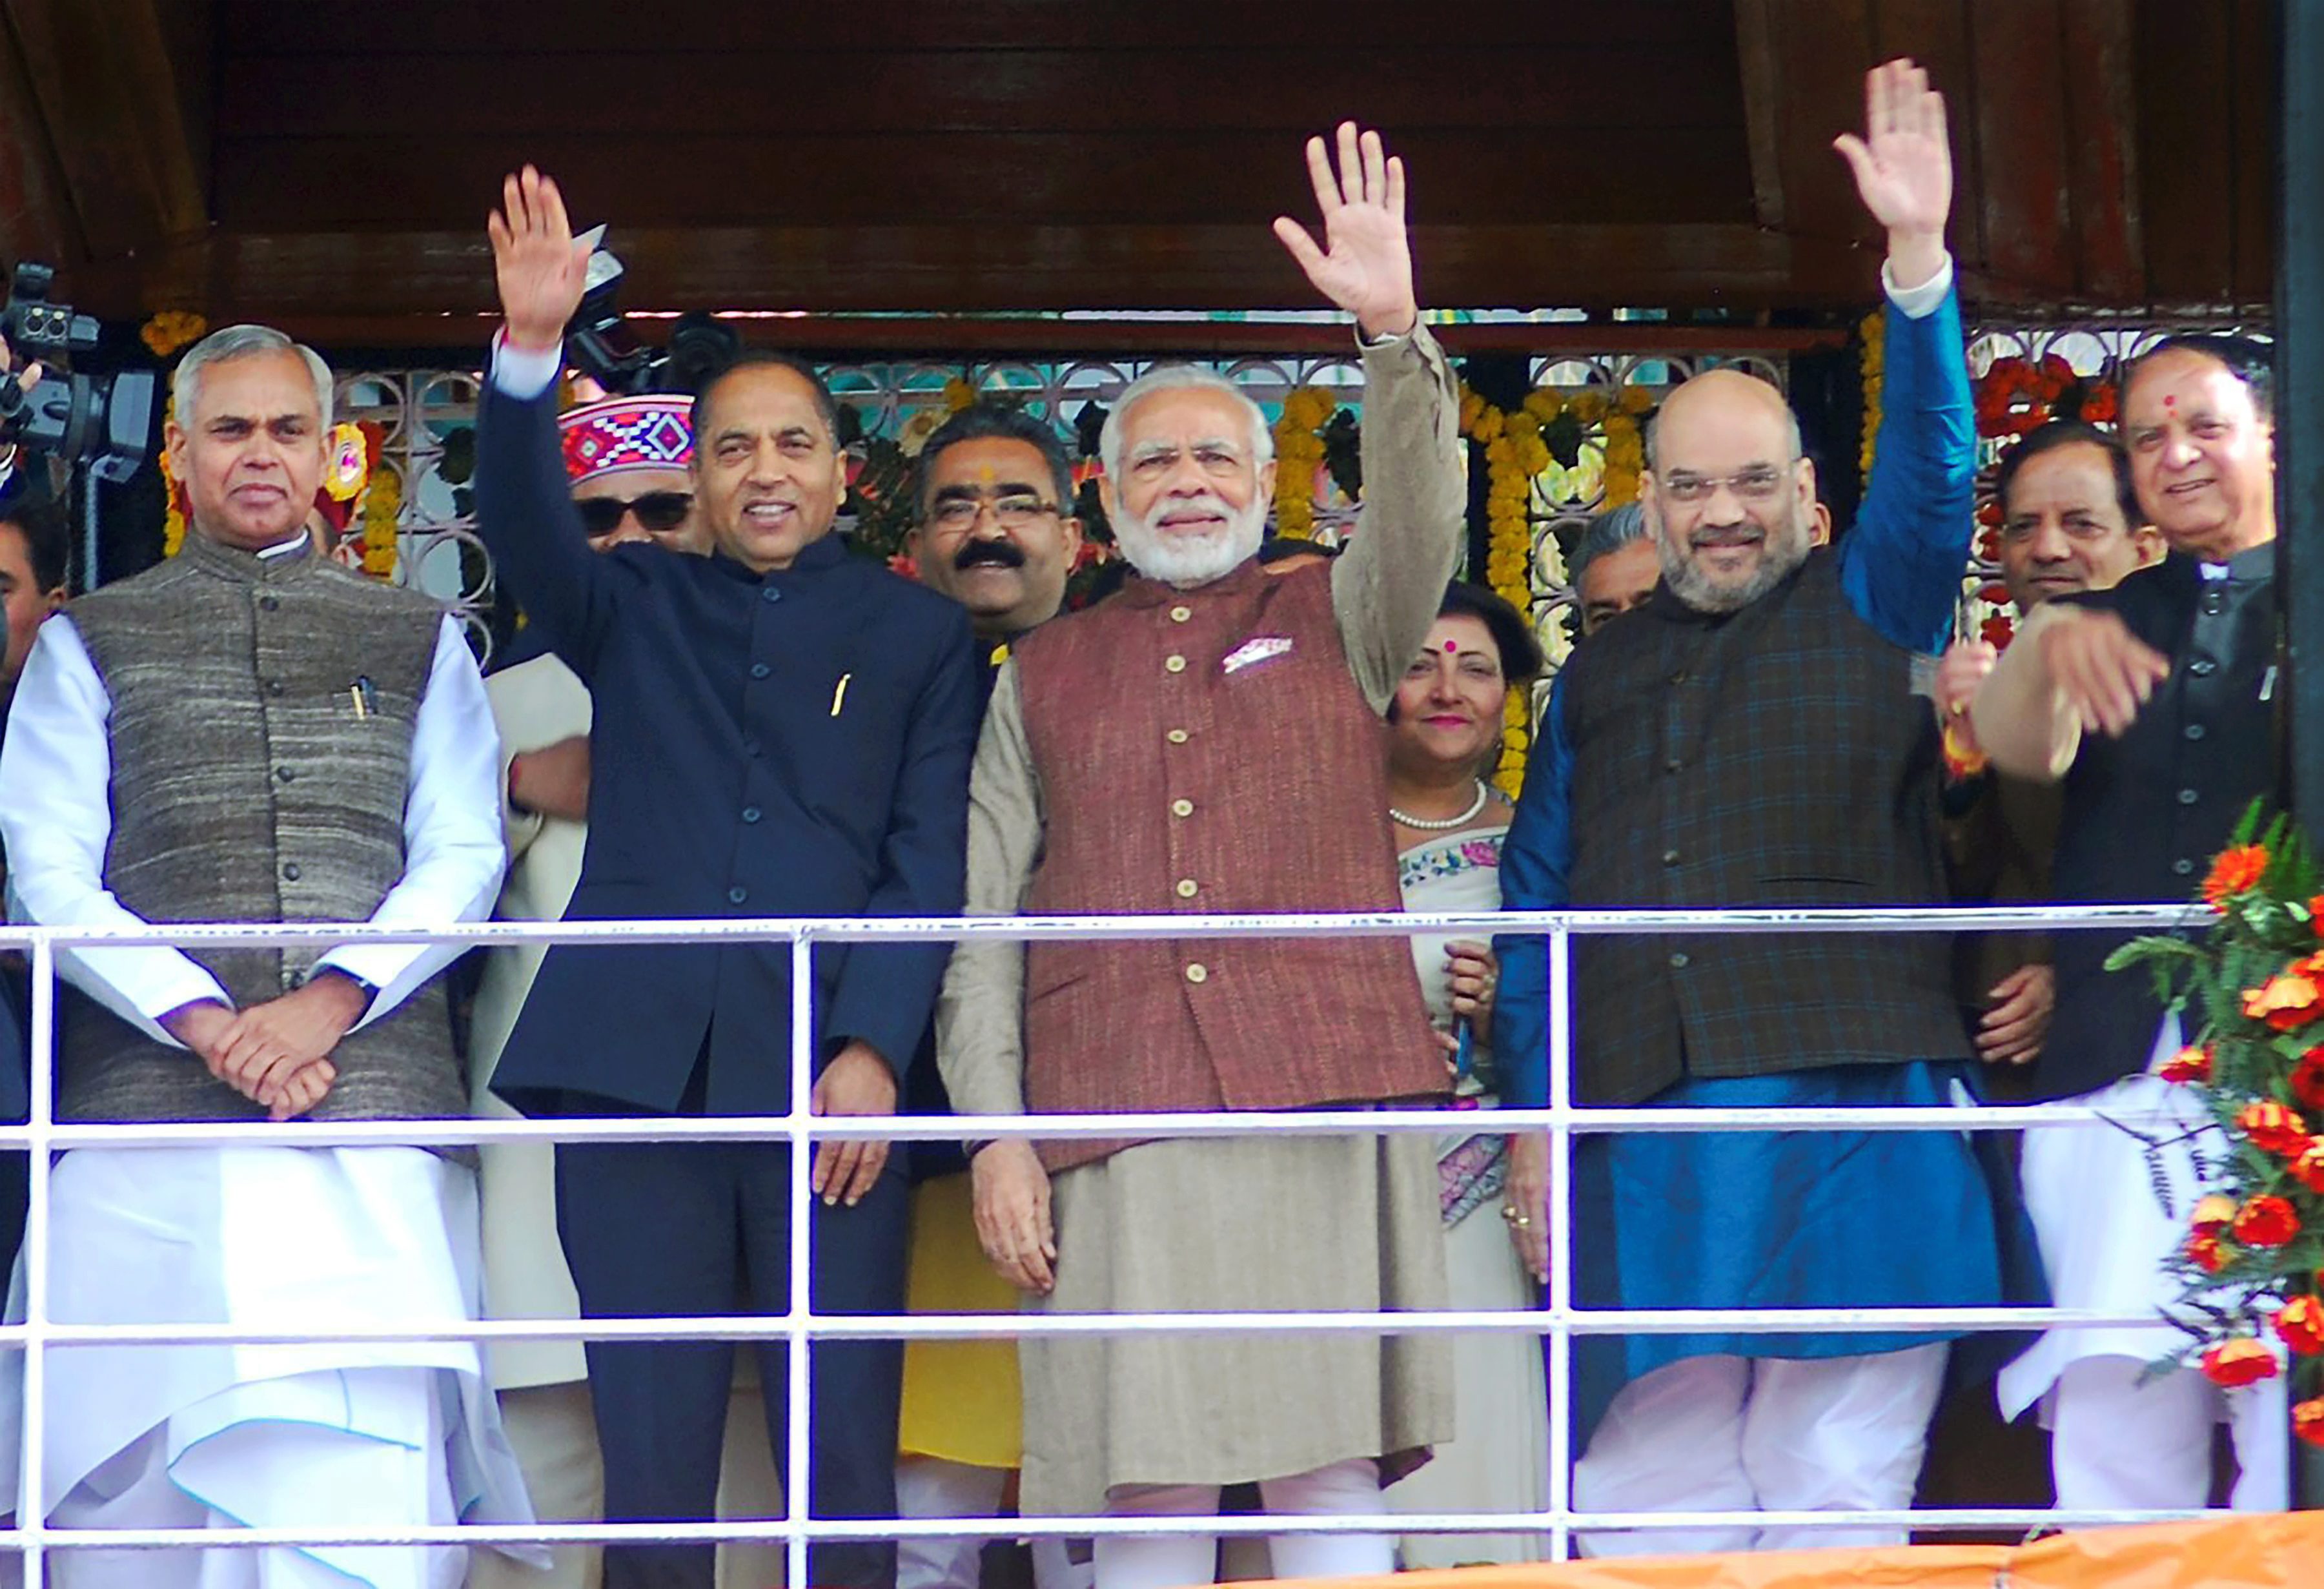 Shimla : Prime Minister Narendra Modi with New Chief Minister of Himachal Pradesh Jairam Thakur, BJP president Amit Shah and Governor of Himachal Pardesh Acharya Devvrat after the swearing-in ceremony in Shimla on Wednesday.PTI Photo (PTI12_27_2017_000022B) *** Local Caption ***